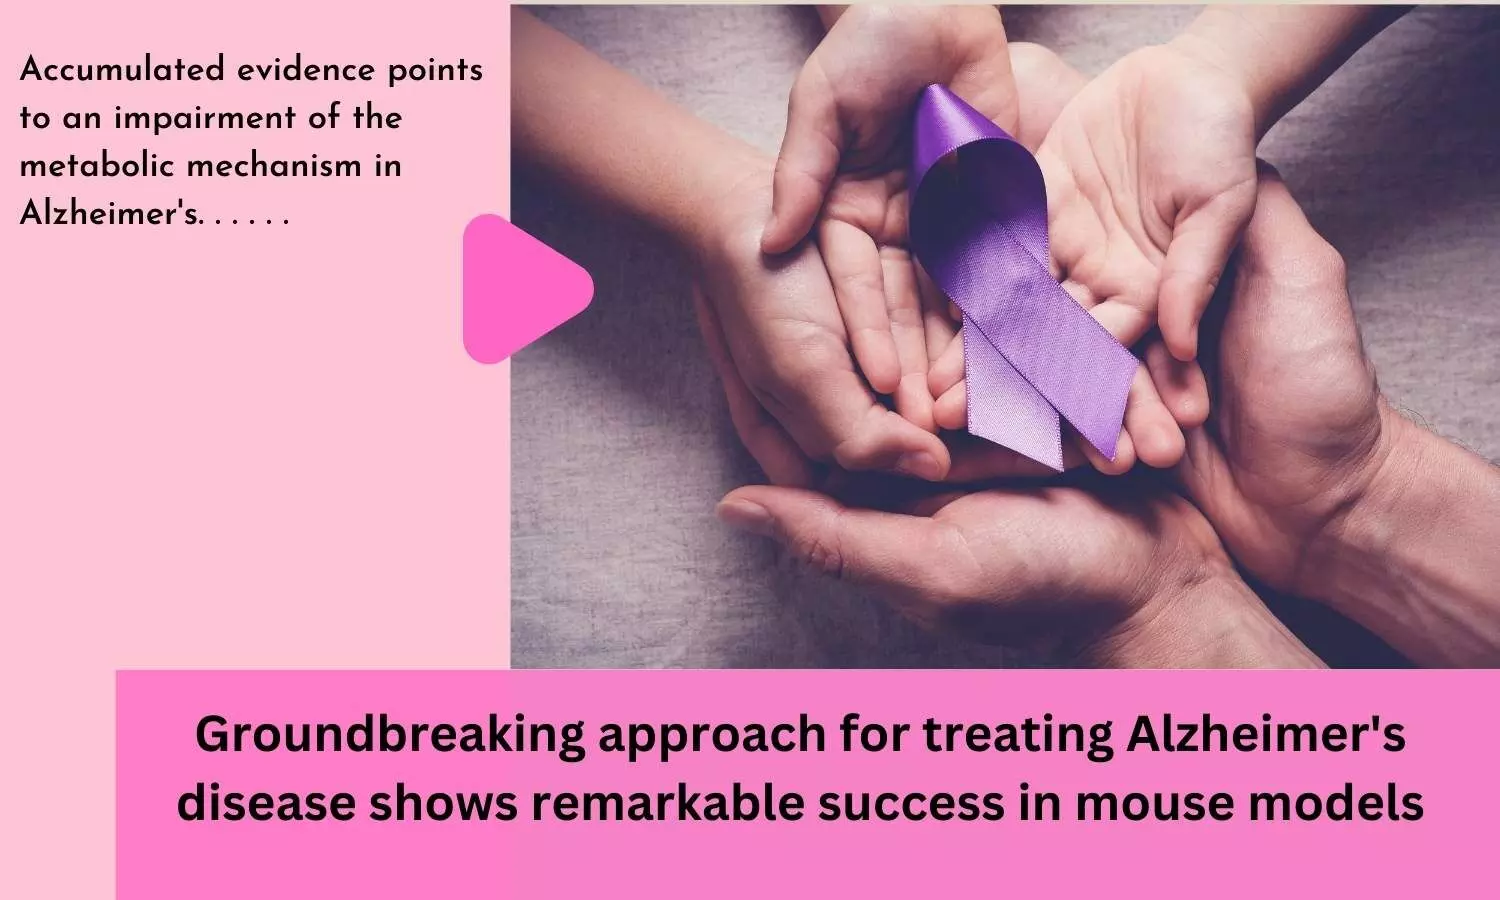 Groundbreaking approach for treating Alzheimers disease shows remarkable success in mouse models